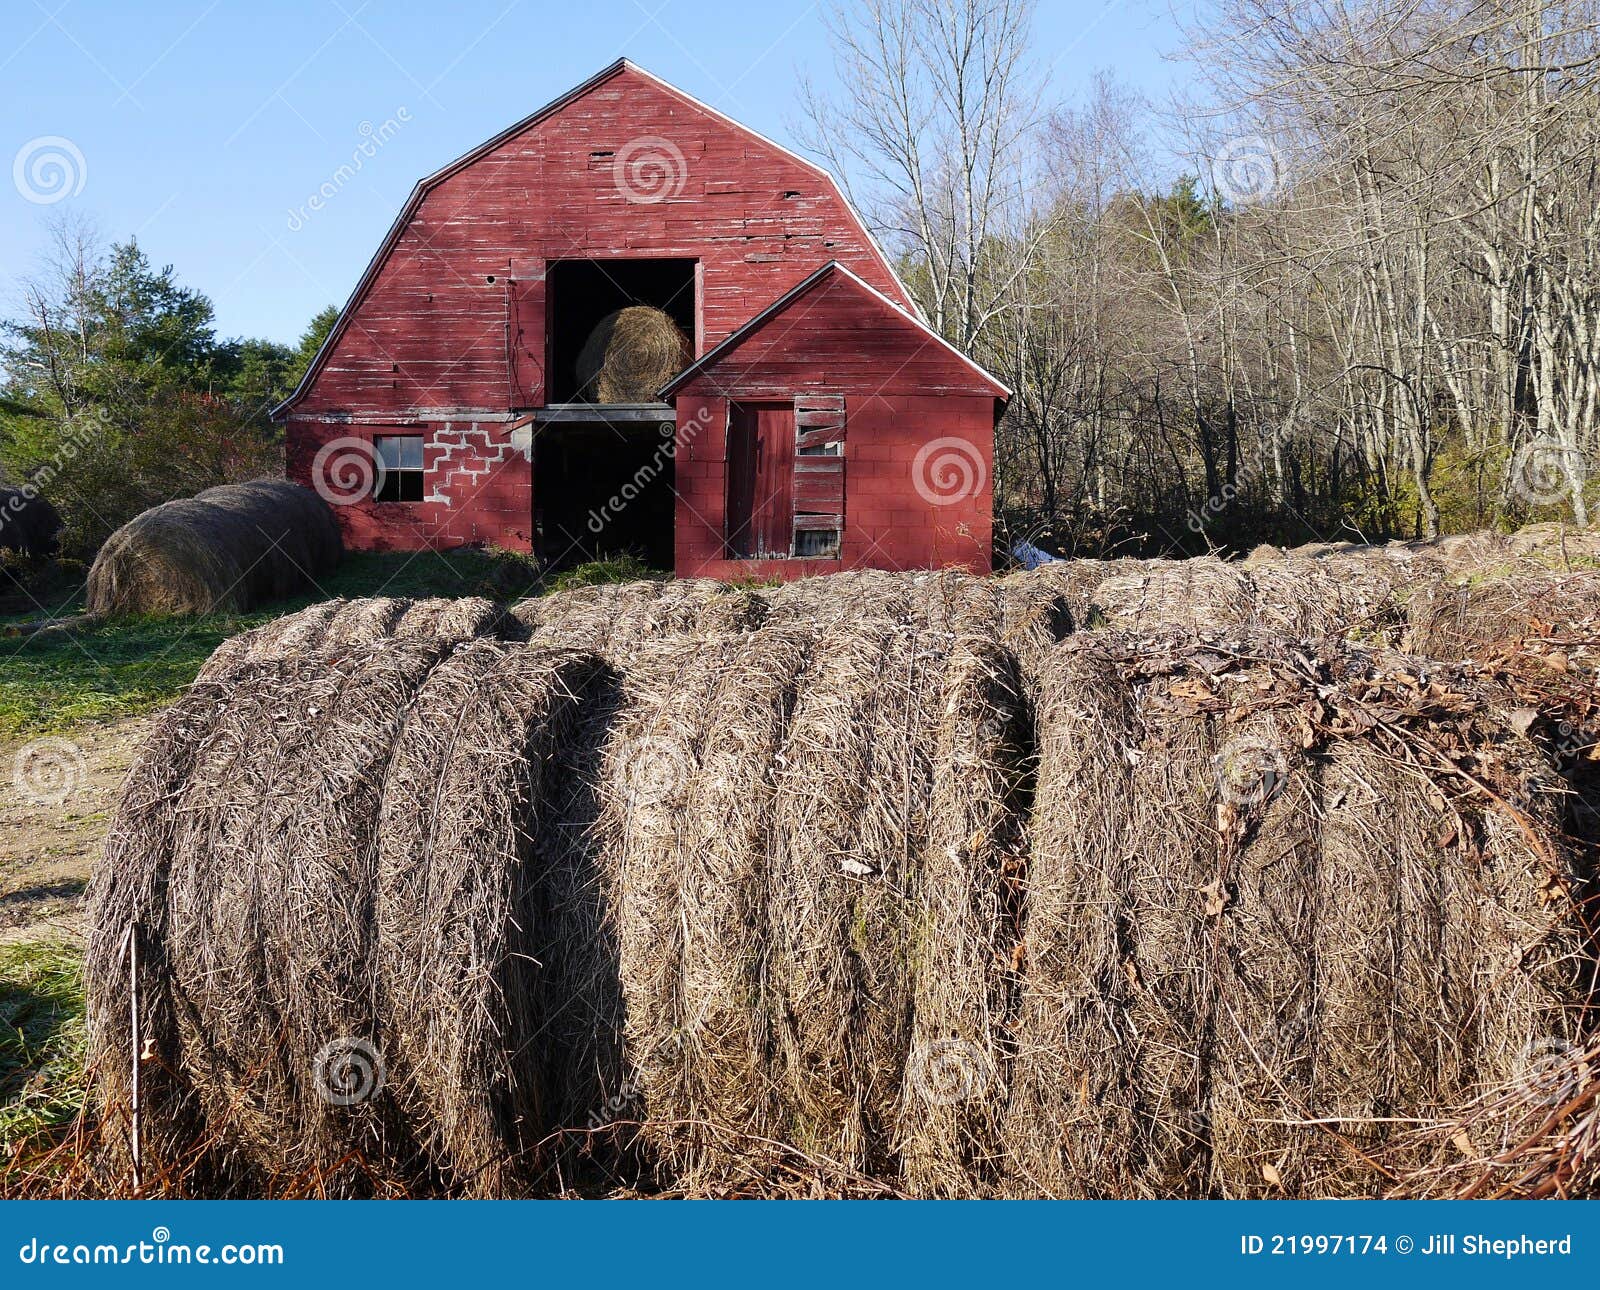 Farm: Hay Bales With Old Red Barn - H Stock Images - Image 